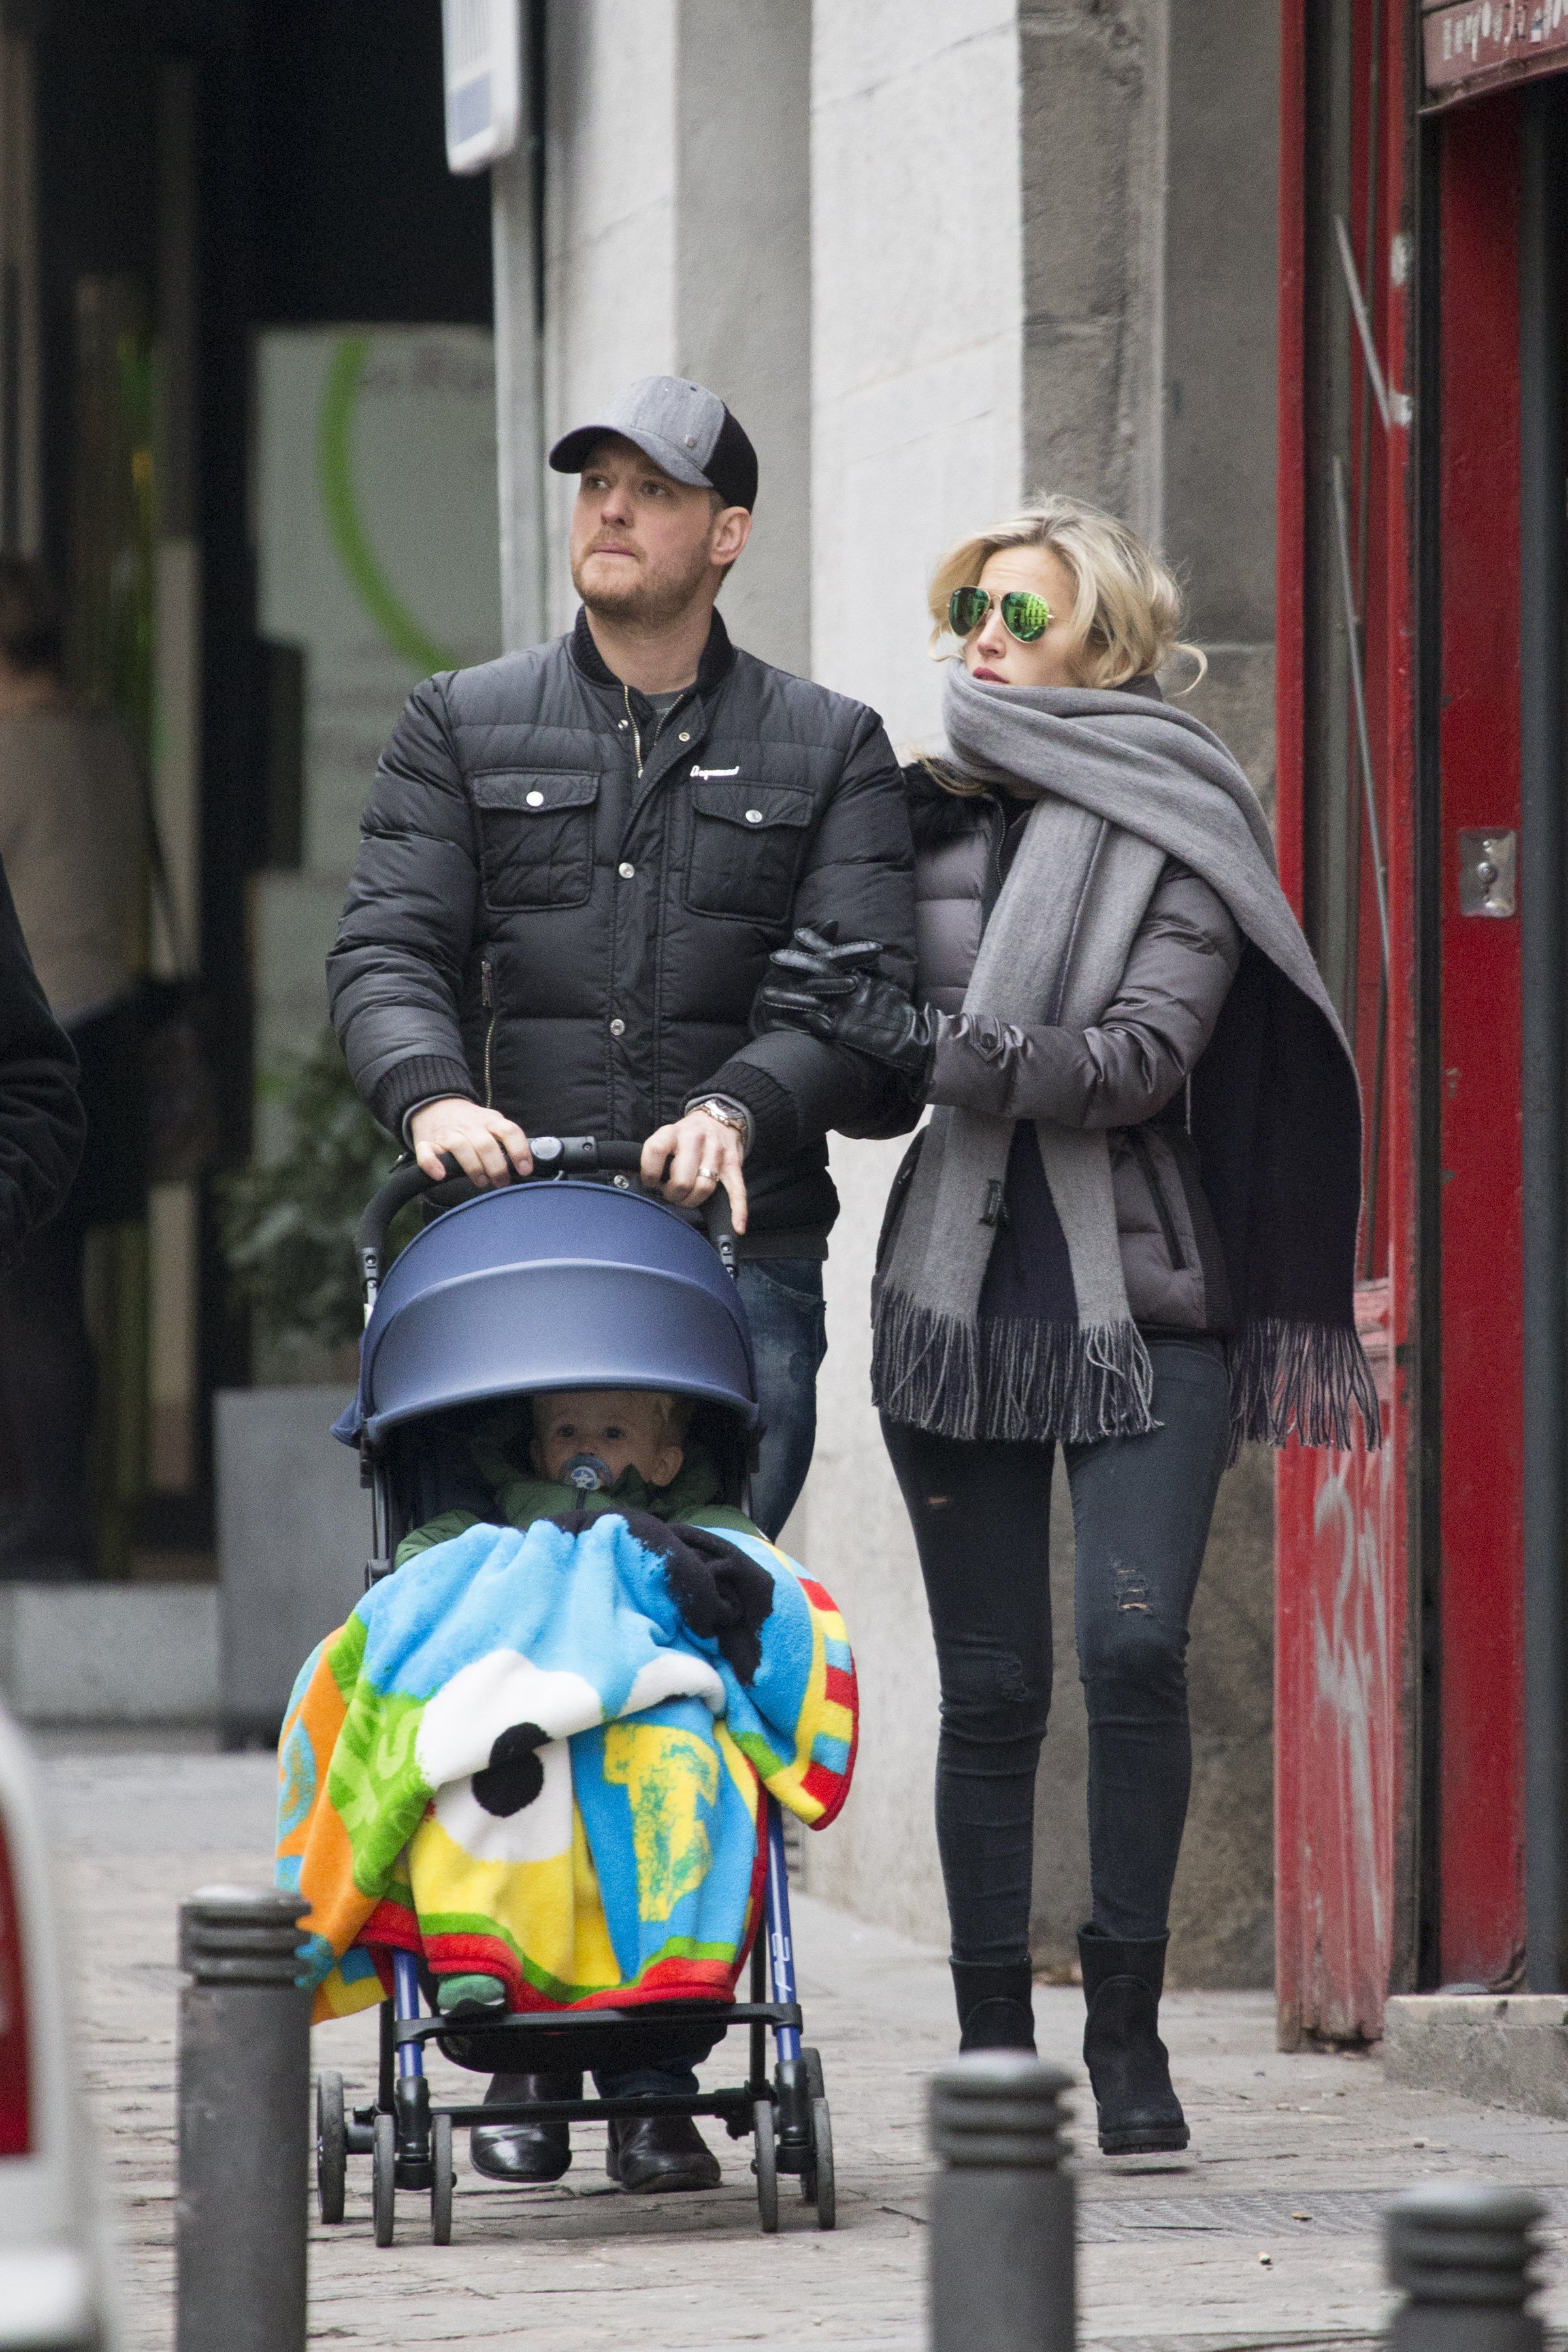 Michael Bublé and Luisana Lopilato strolling with their son Noah on February 12, 2015, in Madrid, Spain. | Source: Iconic/GC Images/Getty Images